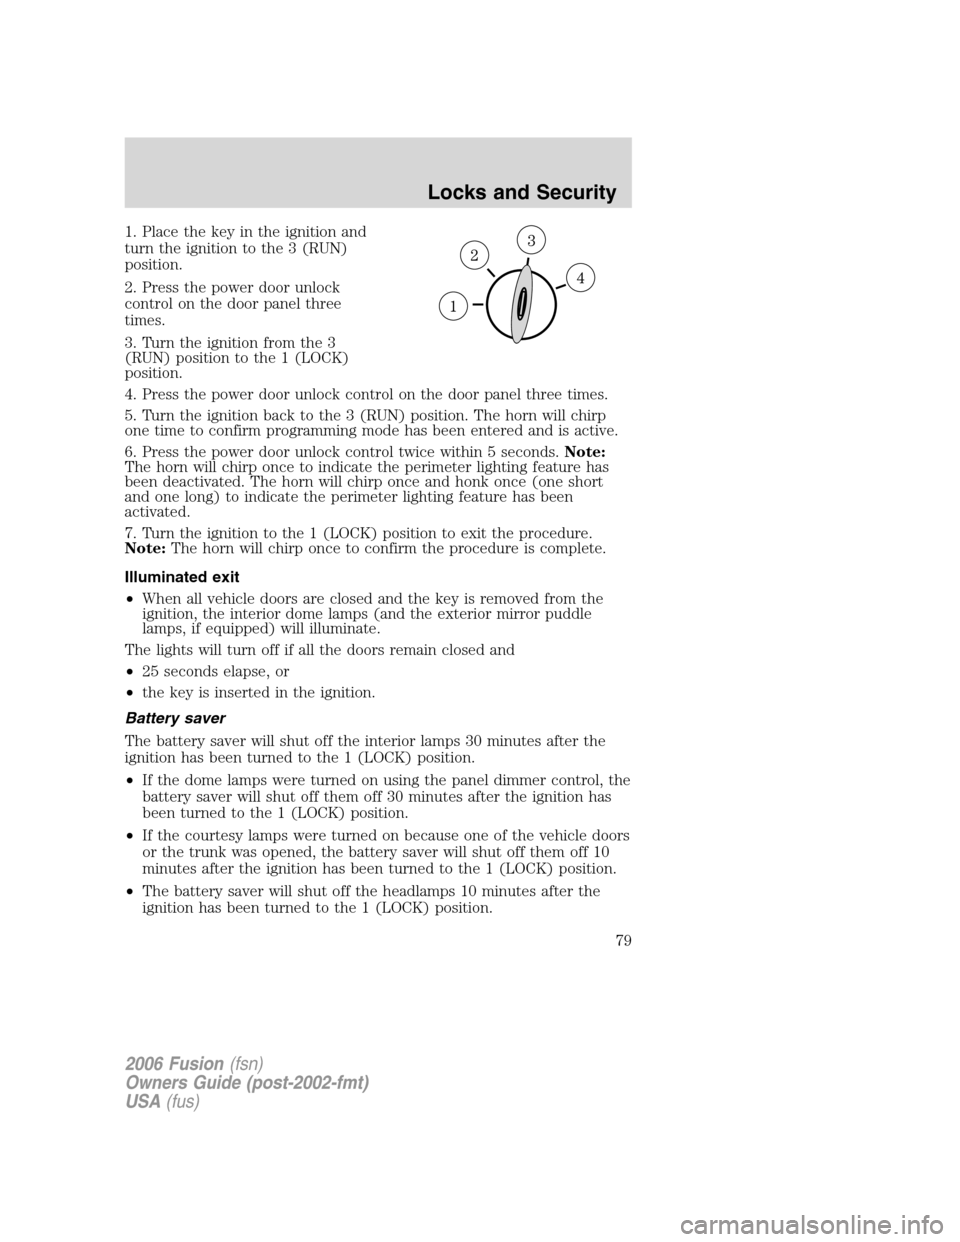 FORD FUSION (AMERICAS) 2006 1.G Manual PDF 1. Place the key in the ignition and
turn the ignition to the 3 (RUN)
position.
2. Press the power door unlock
control on the door panel three
times.
3. Turn the ignition from the 3
(RUN) position to 